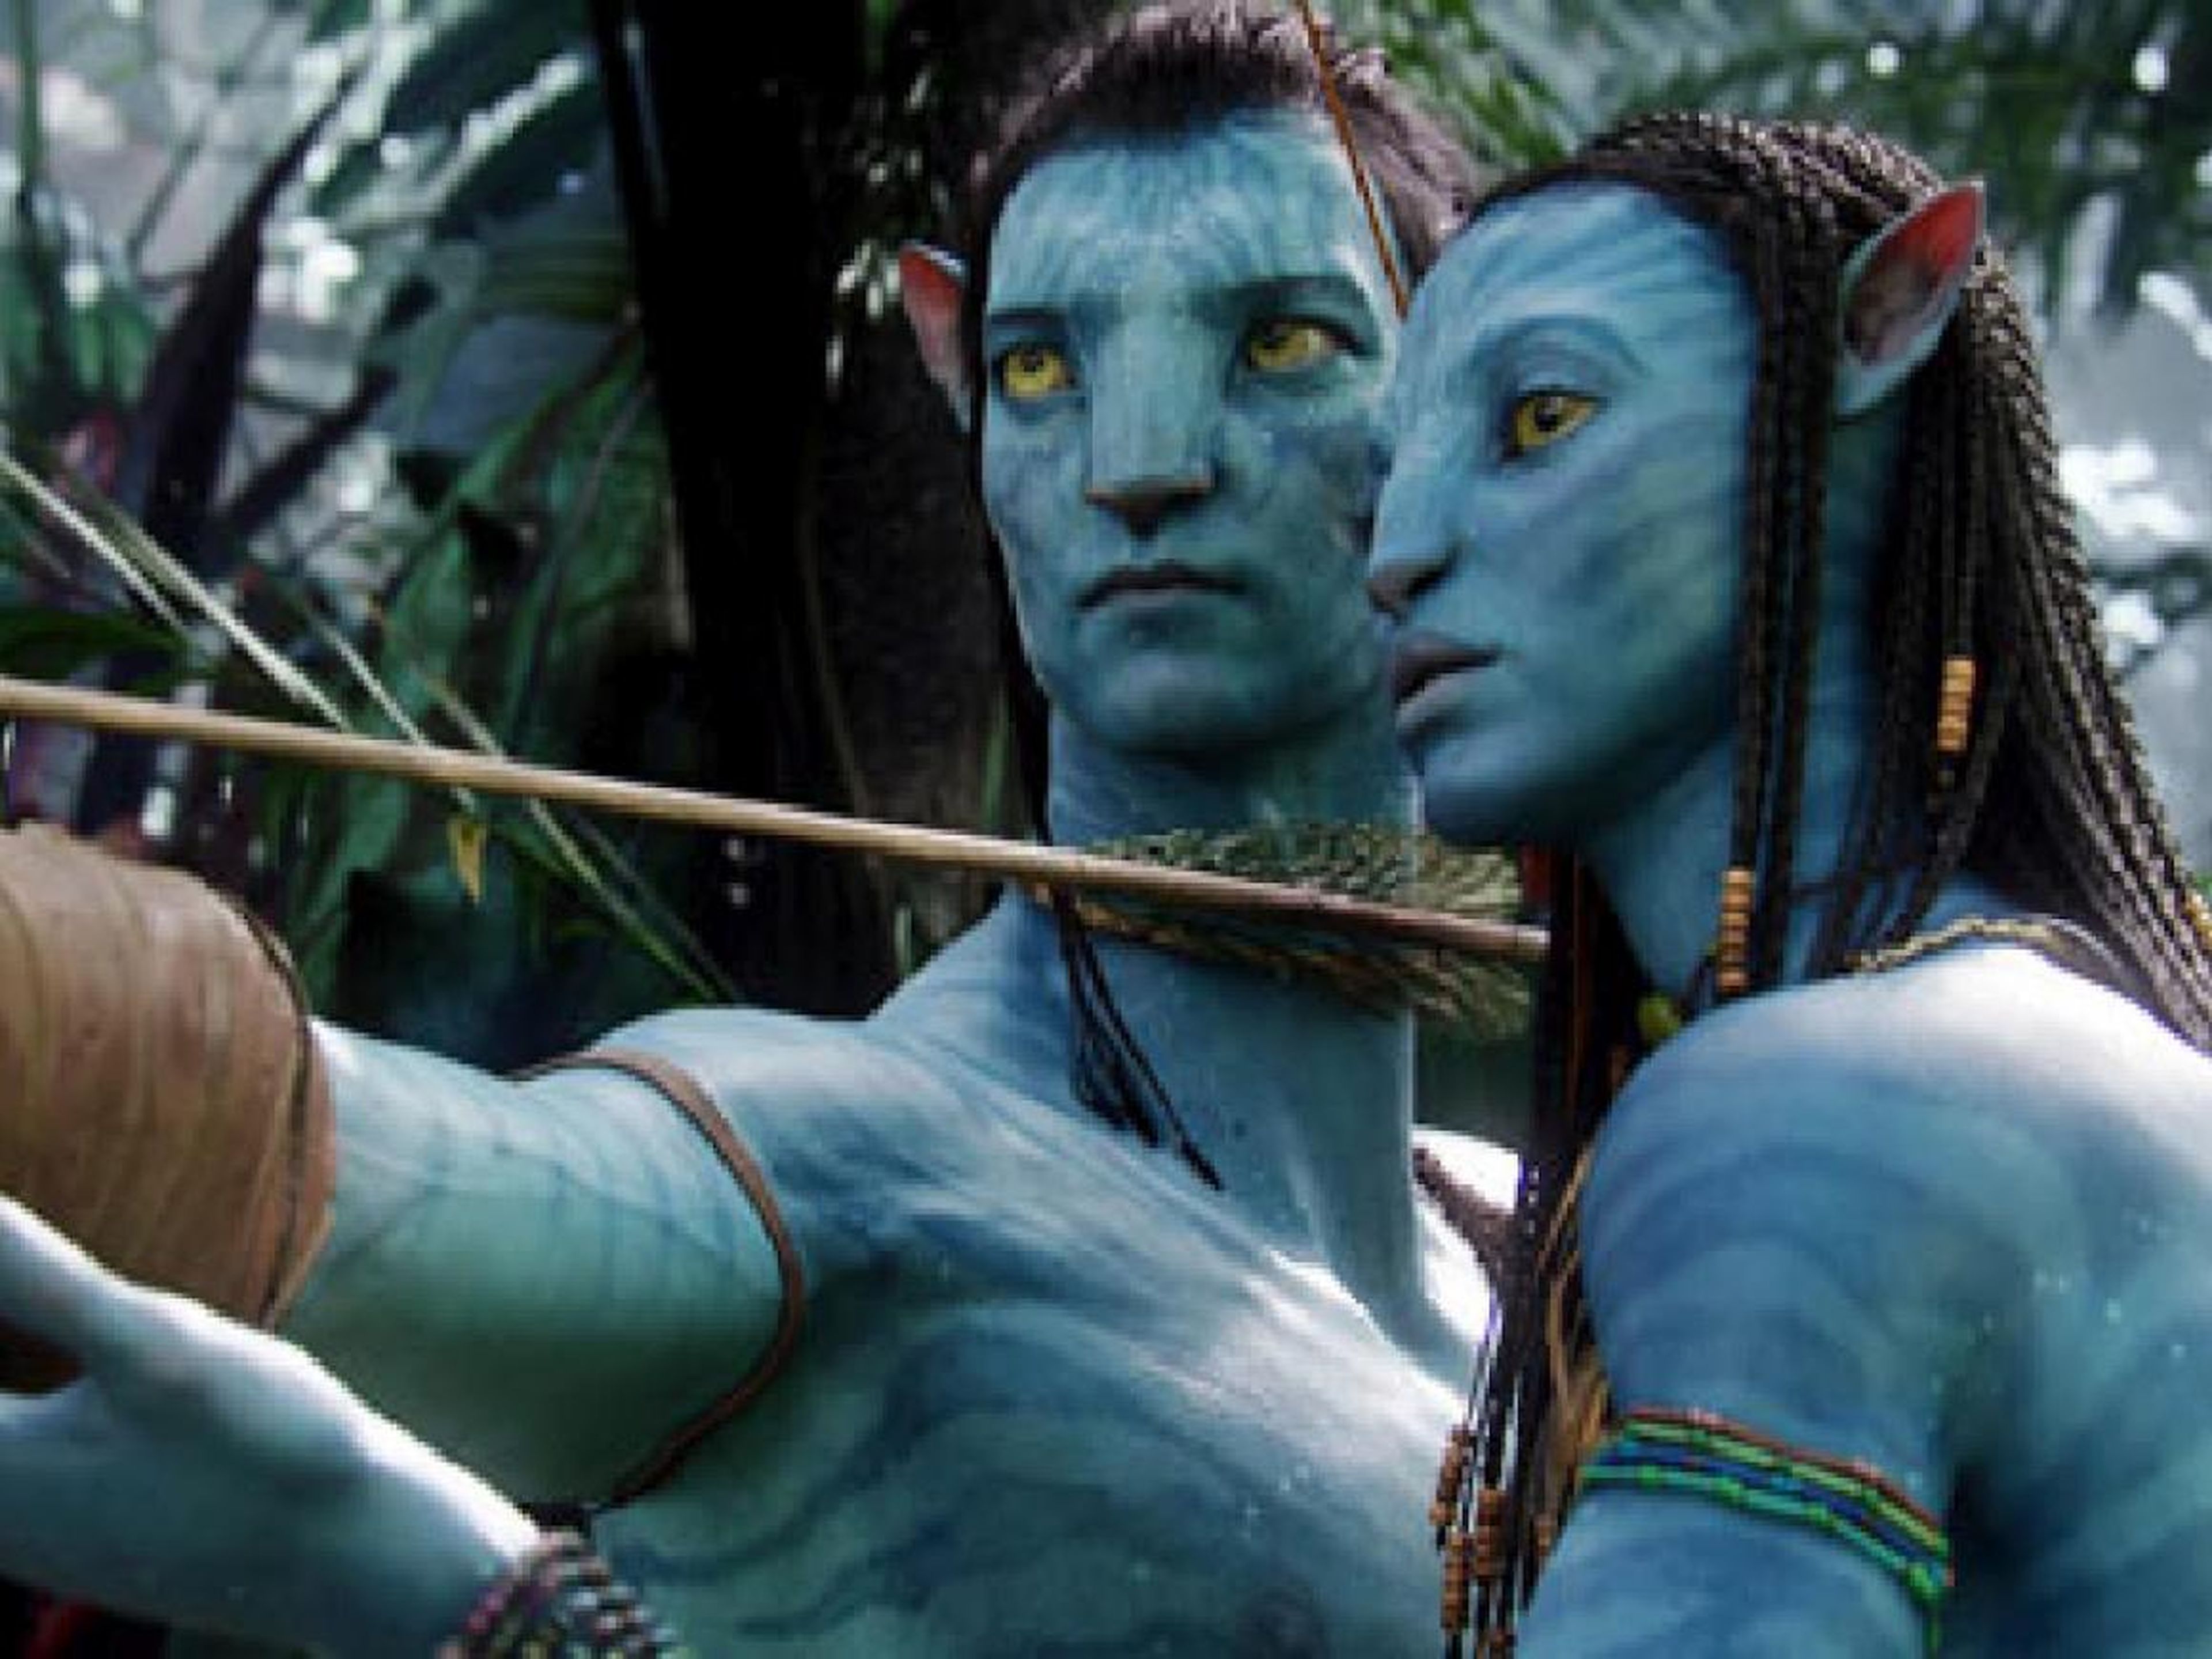 A scene from "Avatar."